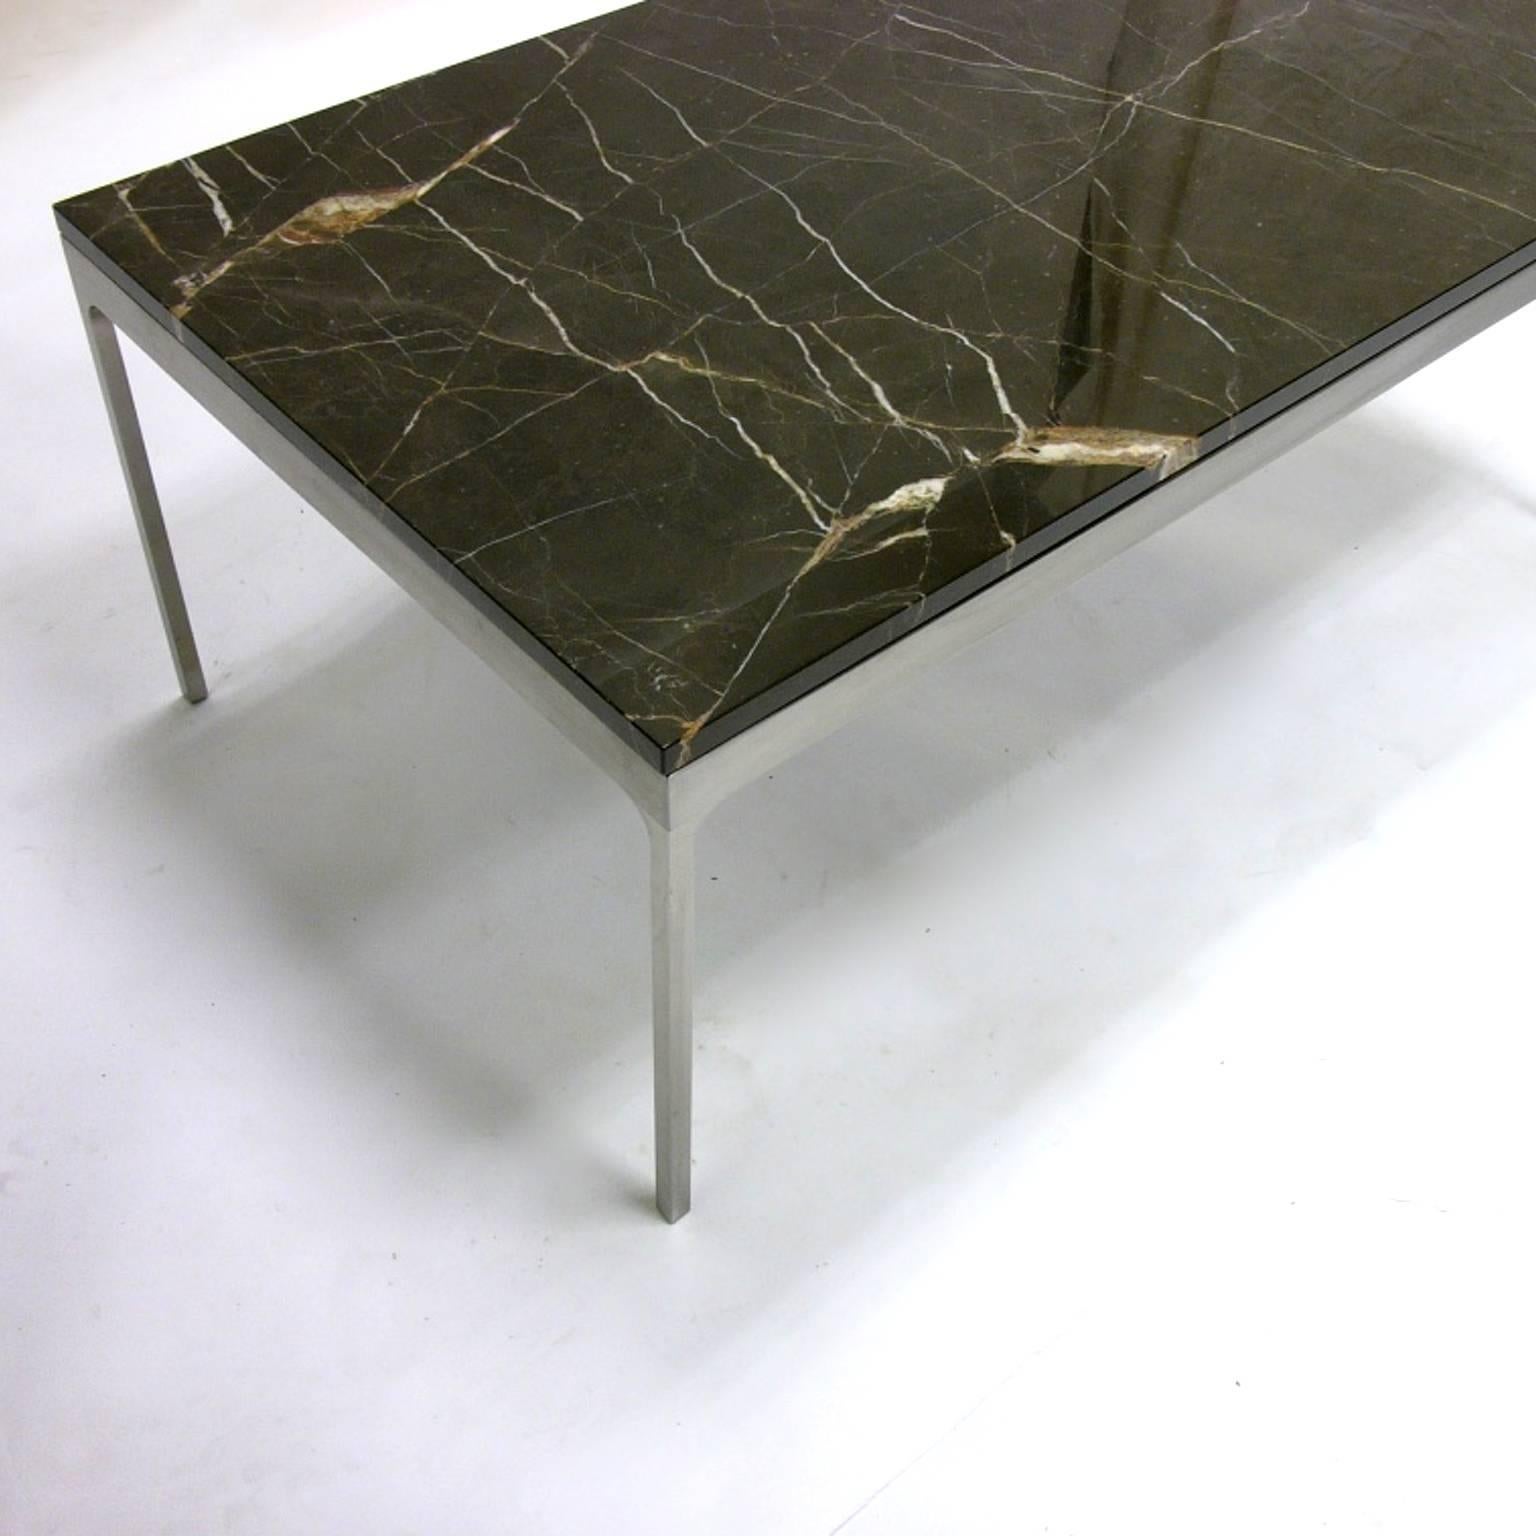 Nicos Zographos designed the Thirty-Five series table in 1960 and remains a current looking design today. Brushed steel base and stunning polished nero marquina top.